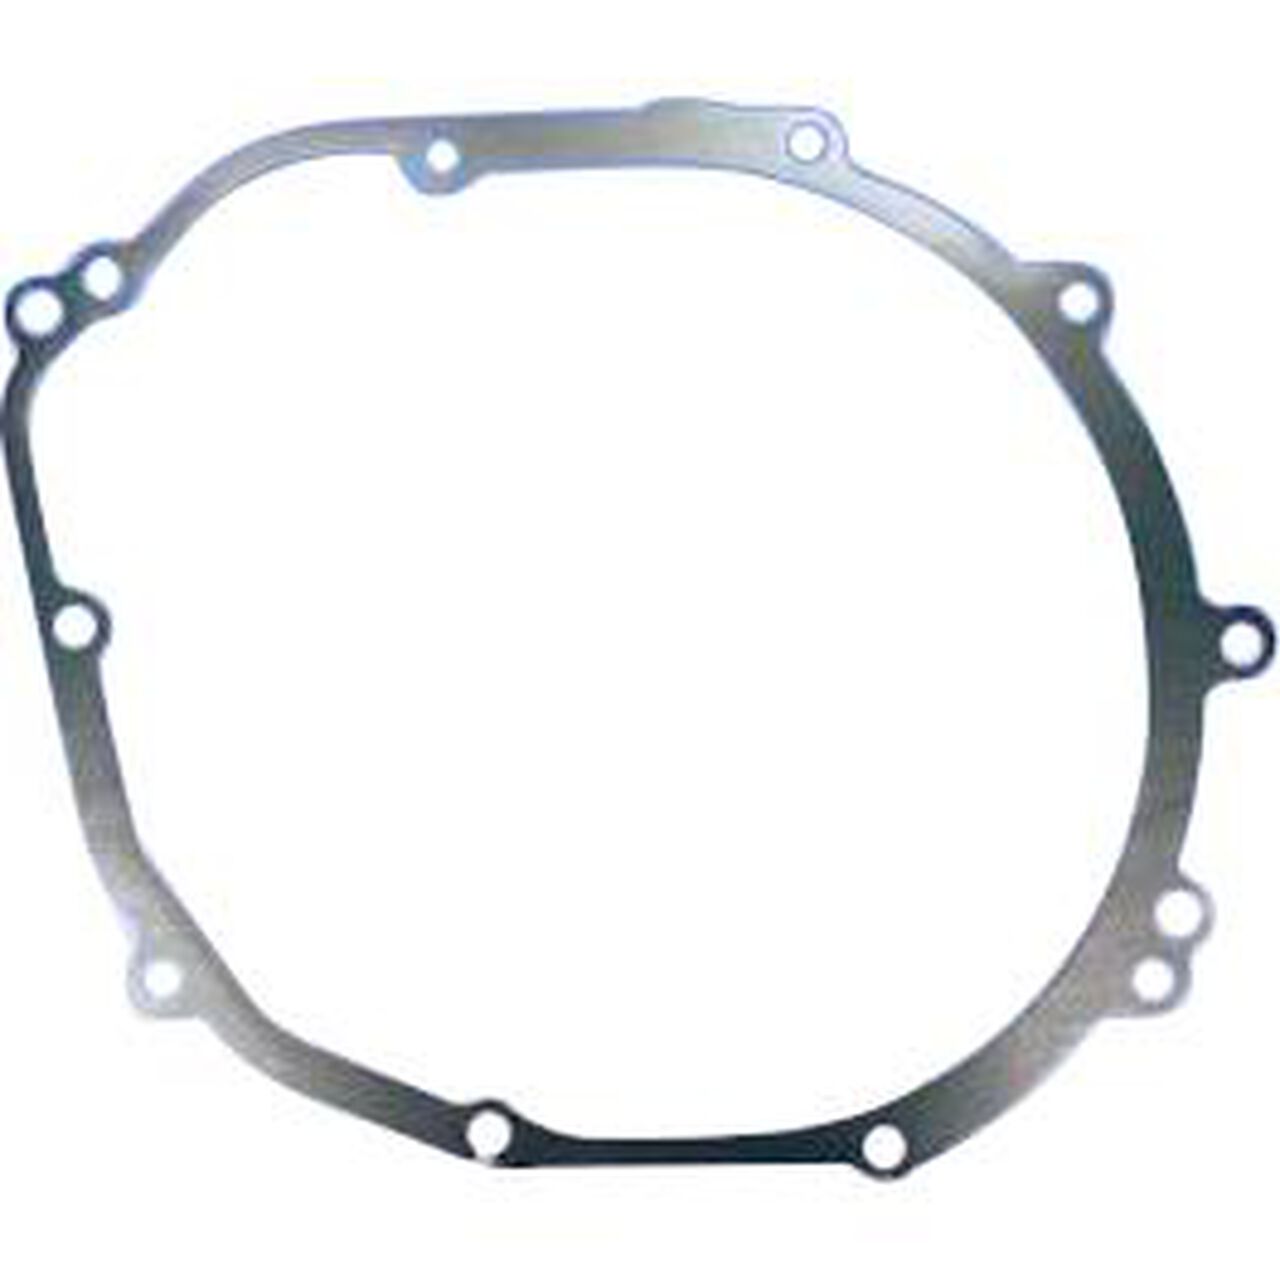 Italy for Aprilia MX 125 Clutch Cover Gasket from Athena 